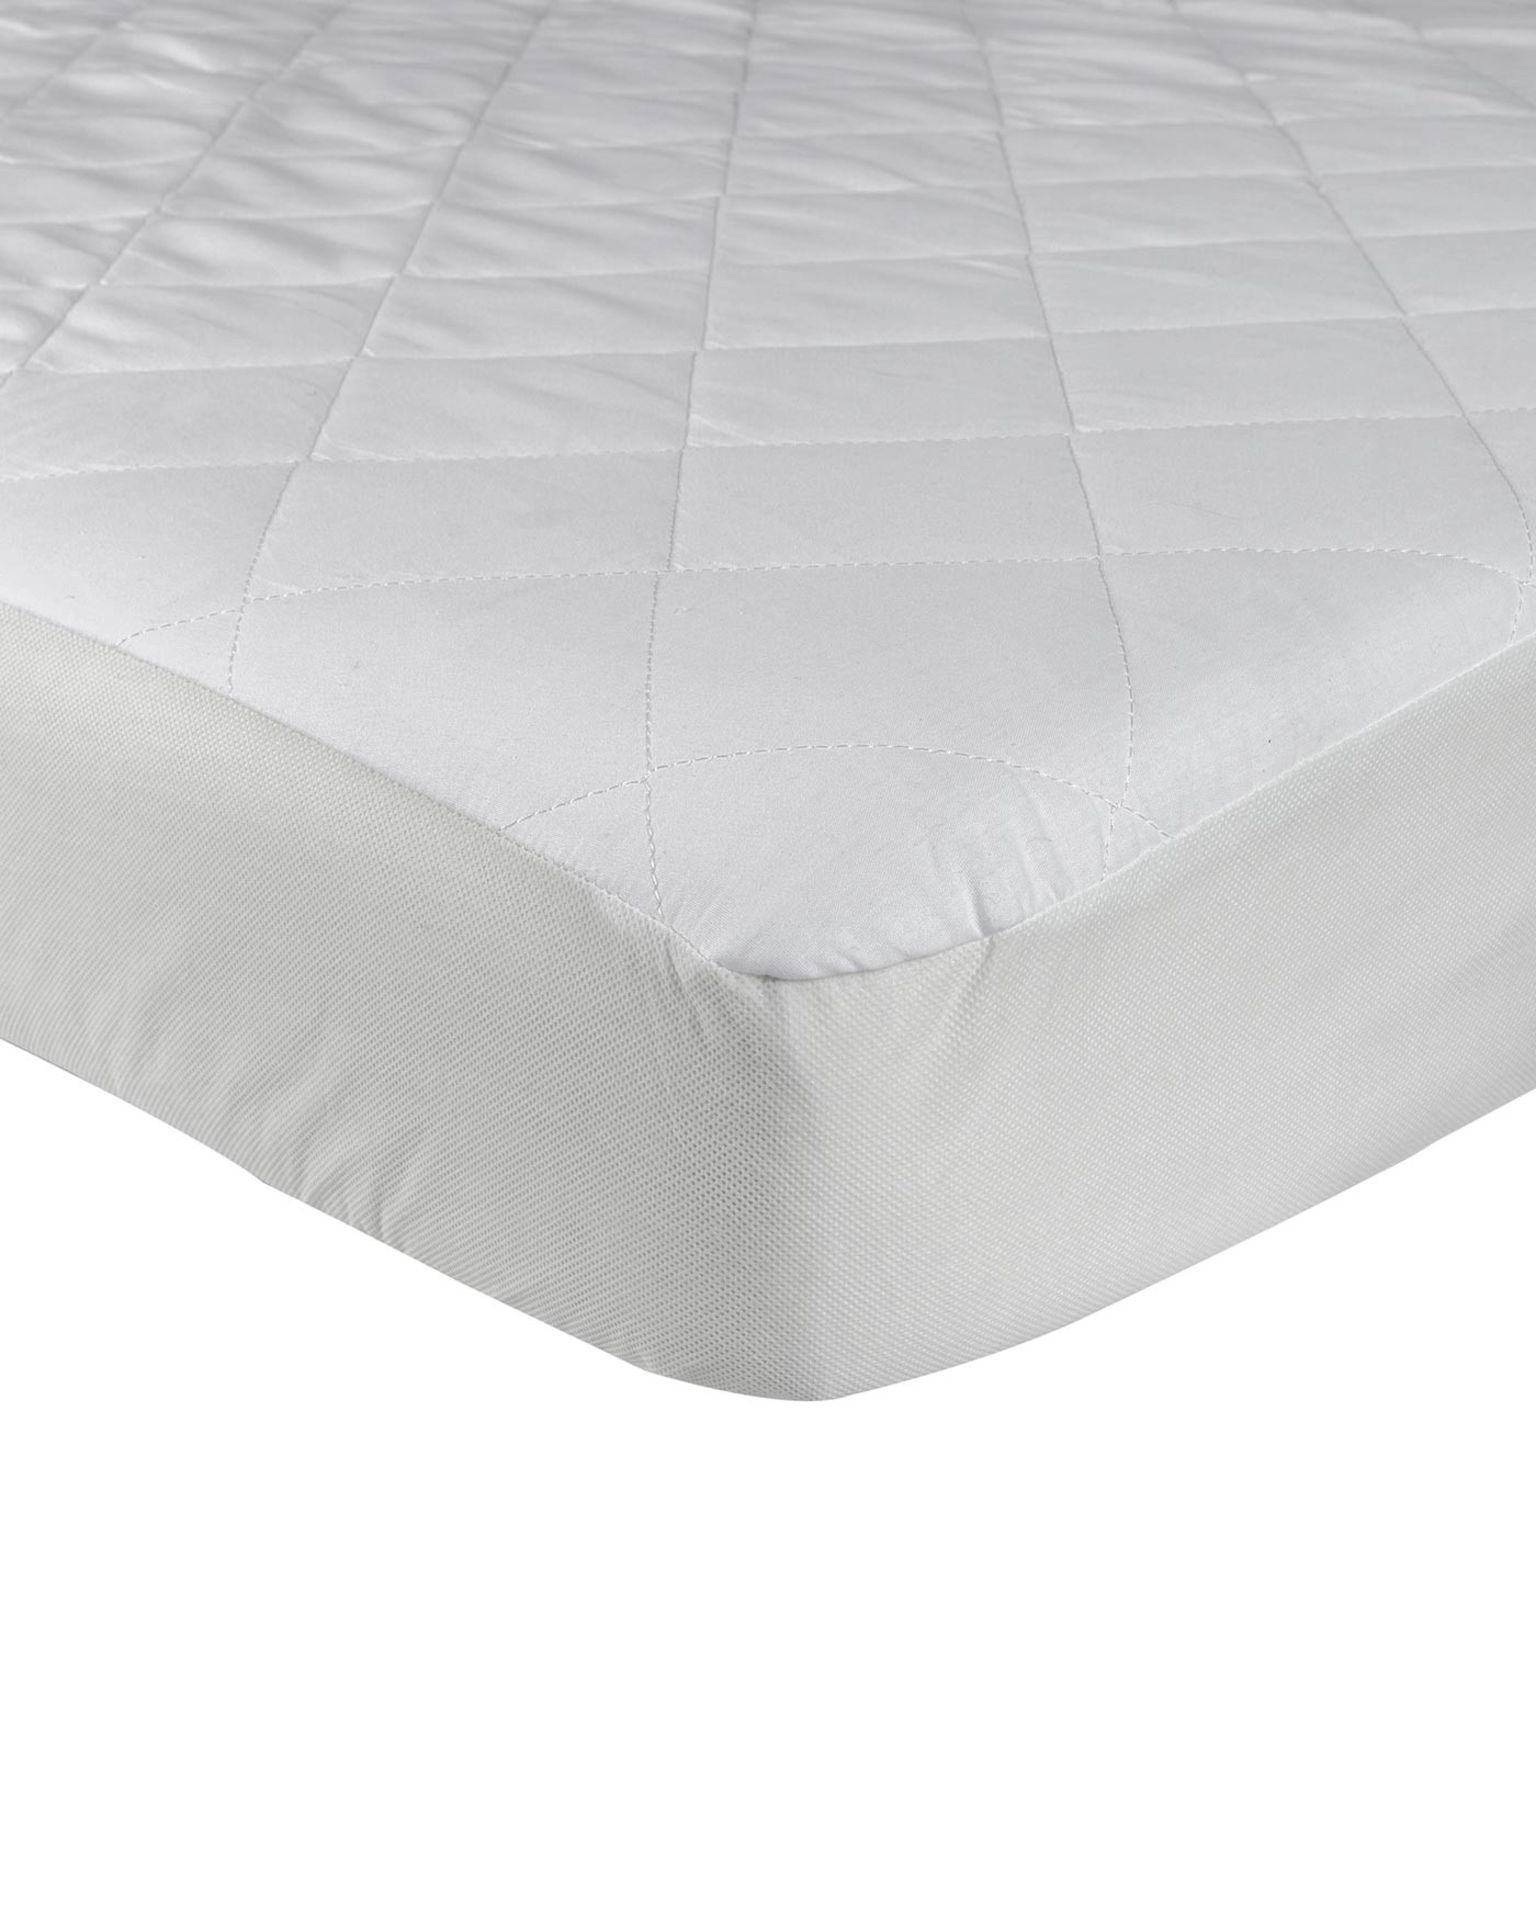 V Brand New 152x198+33cm King Size Luxury Quilted Fitted Extra Deep Mattress Protector